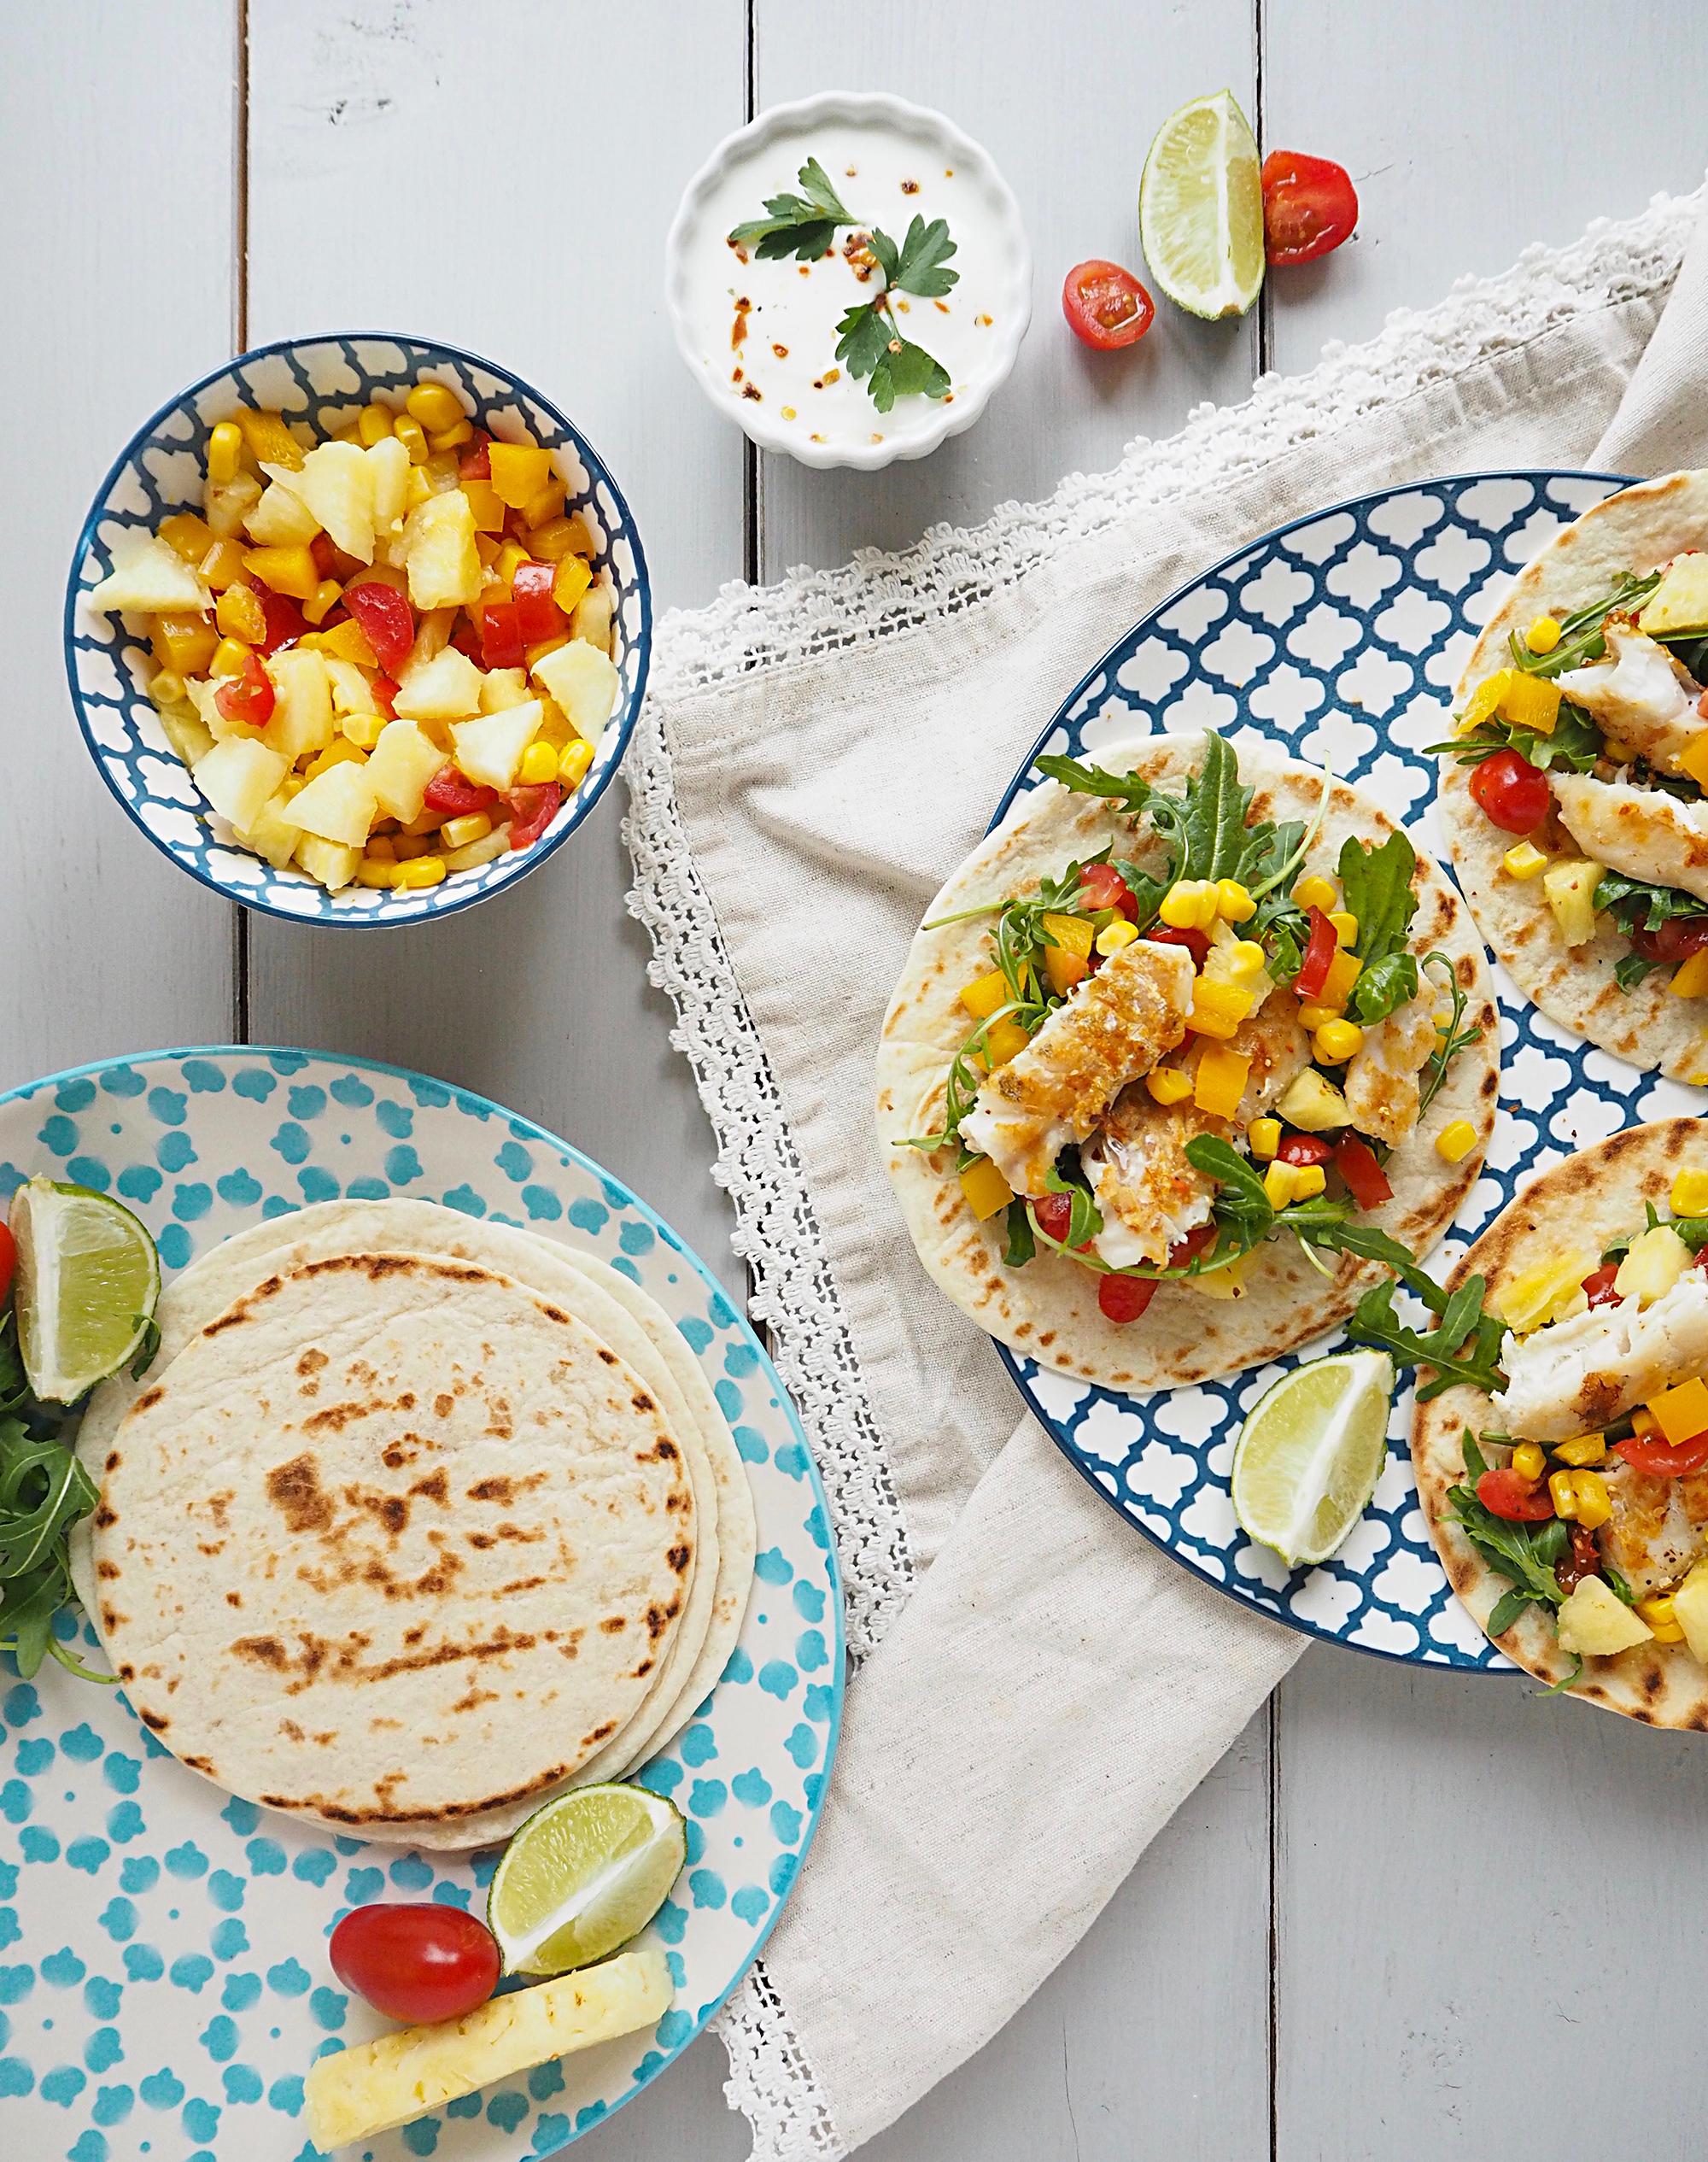 A blue and white patterned plate sits on a white napkin. On the plate are 3 open fish tacos with pineapple salsa. To the left is a bowl of pineapple salsa and a plate containing more tortillas.